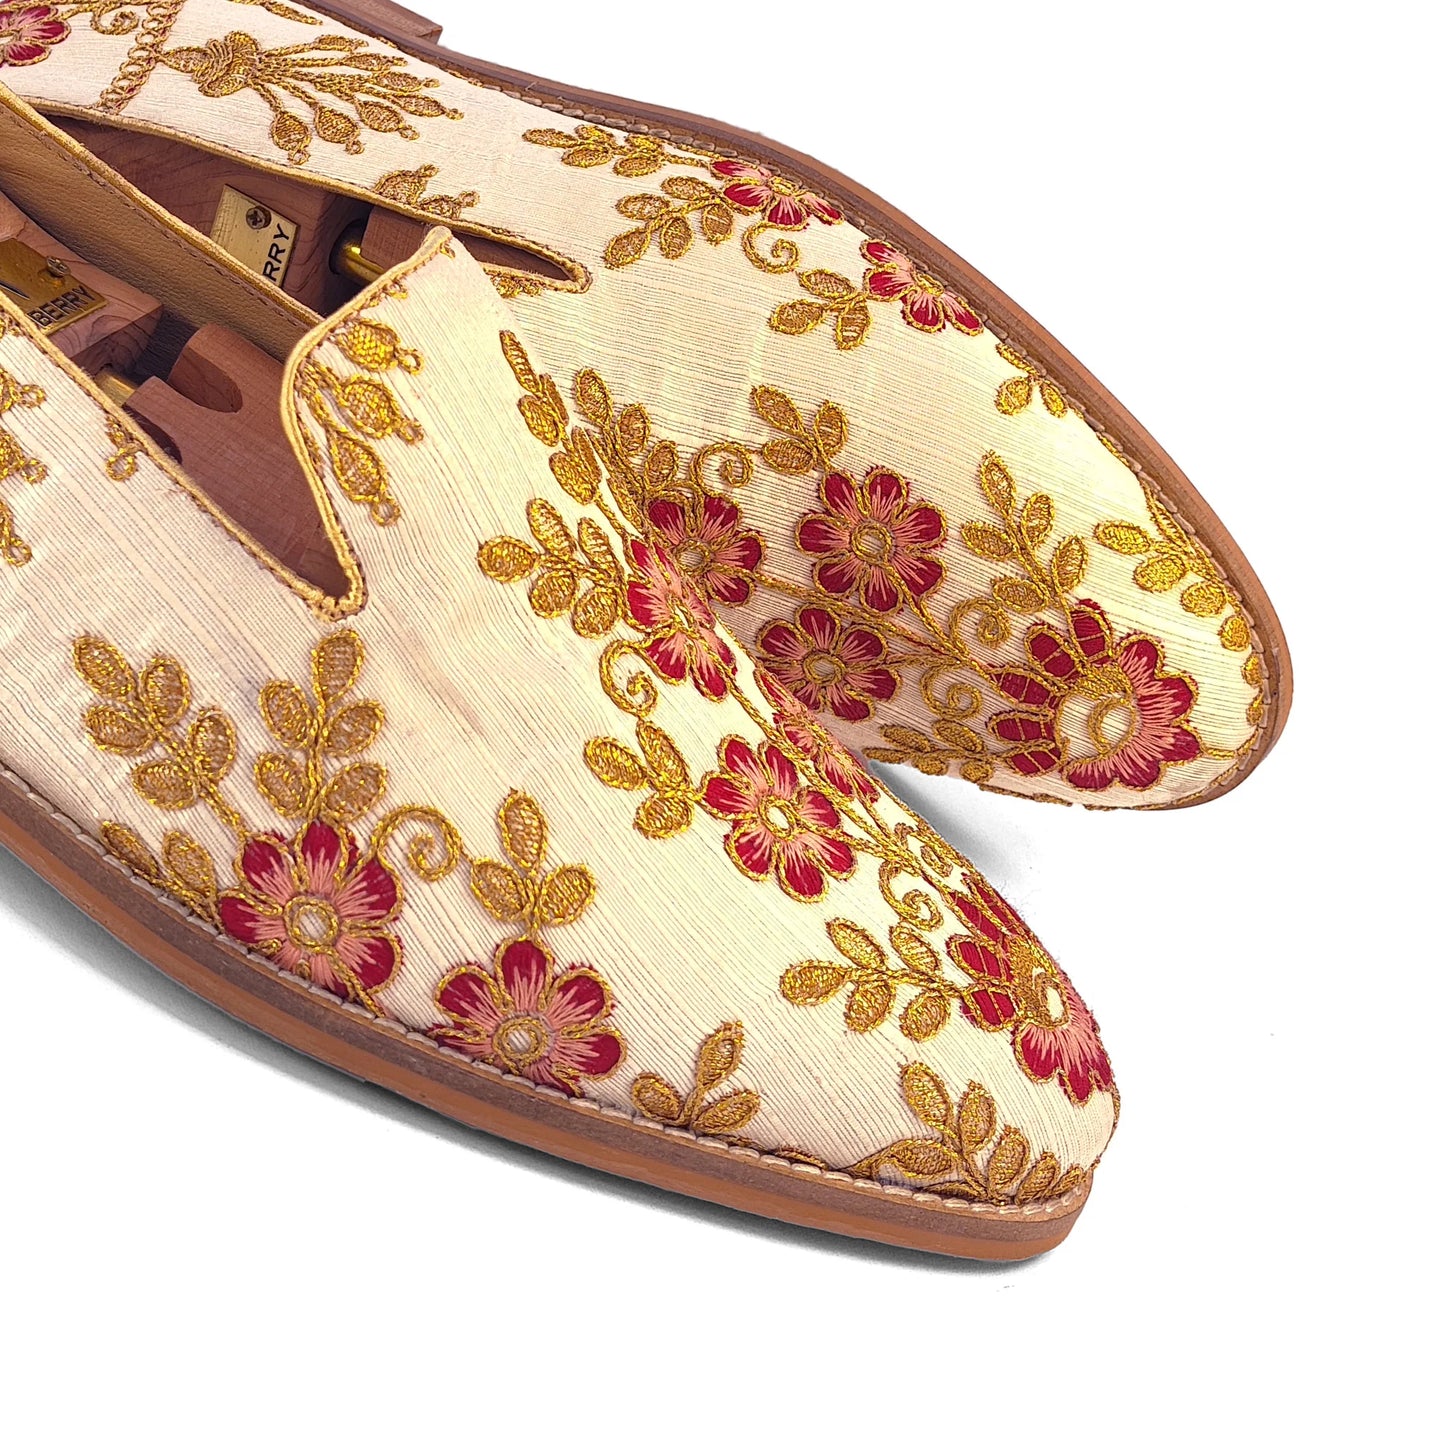 Biege Gold and Cherry Full Embroidery Loafer Mojari Slipon for Men